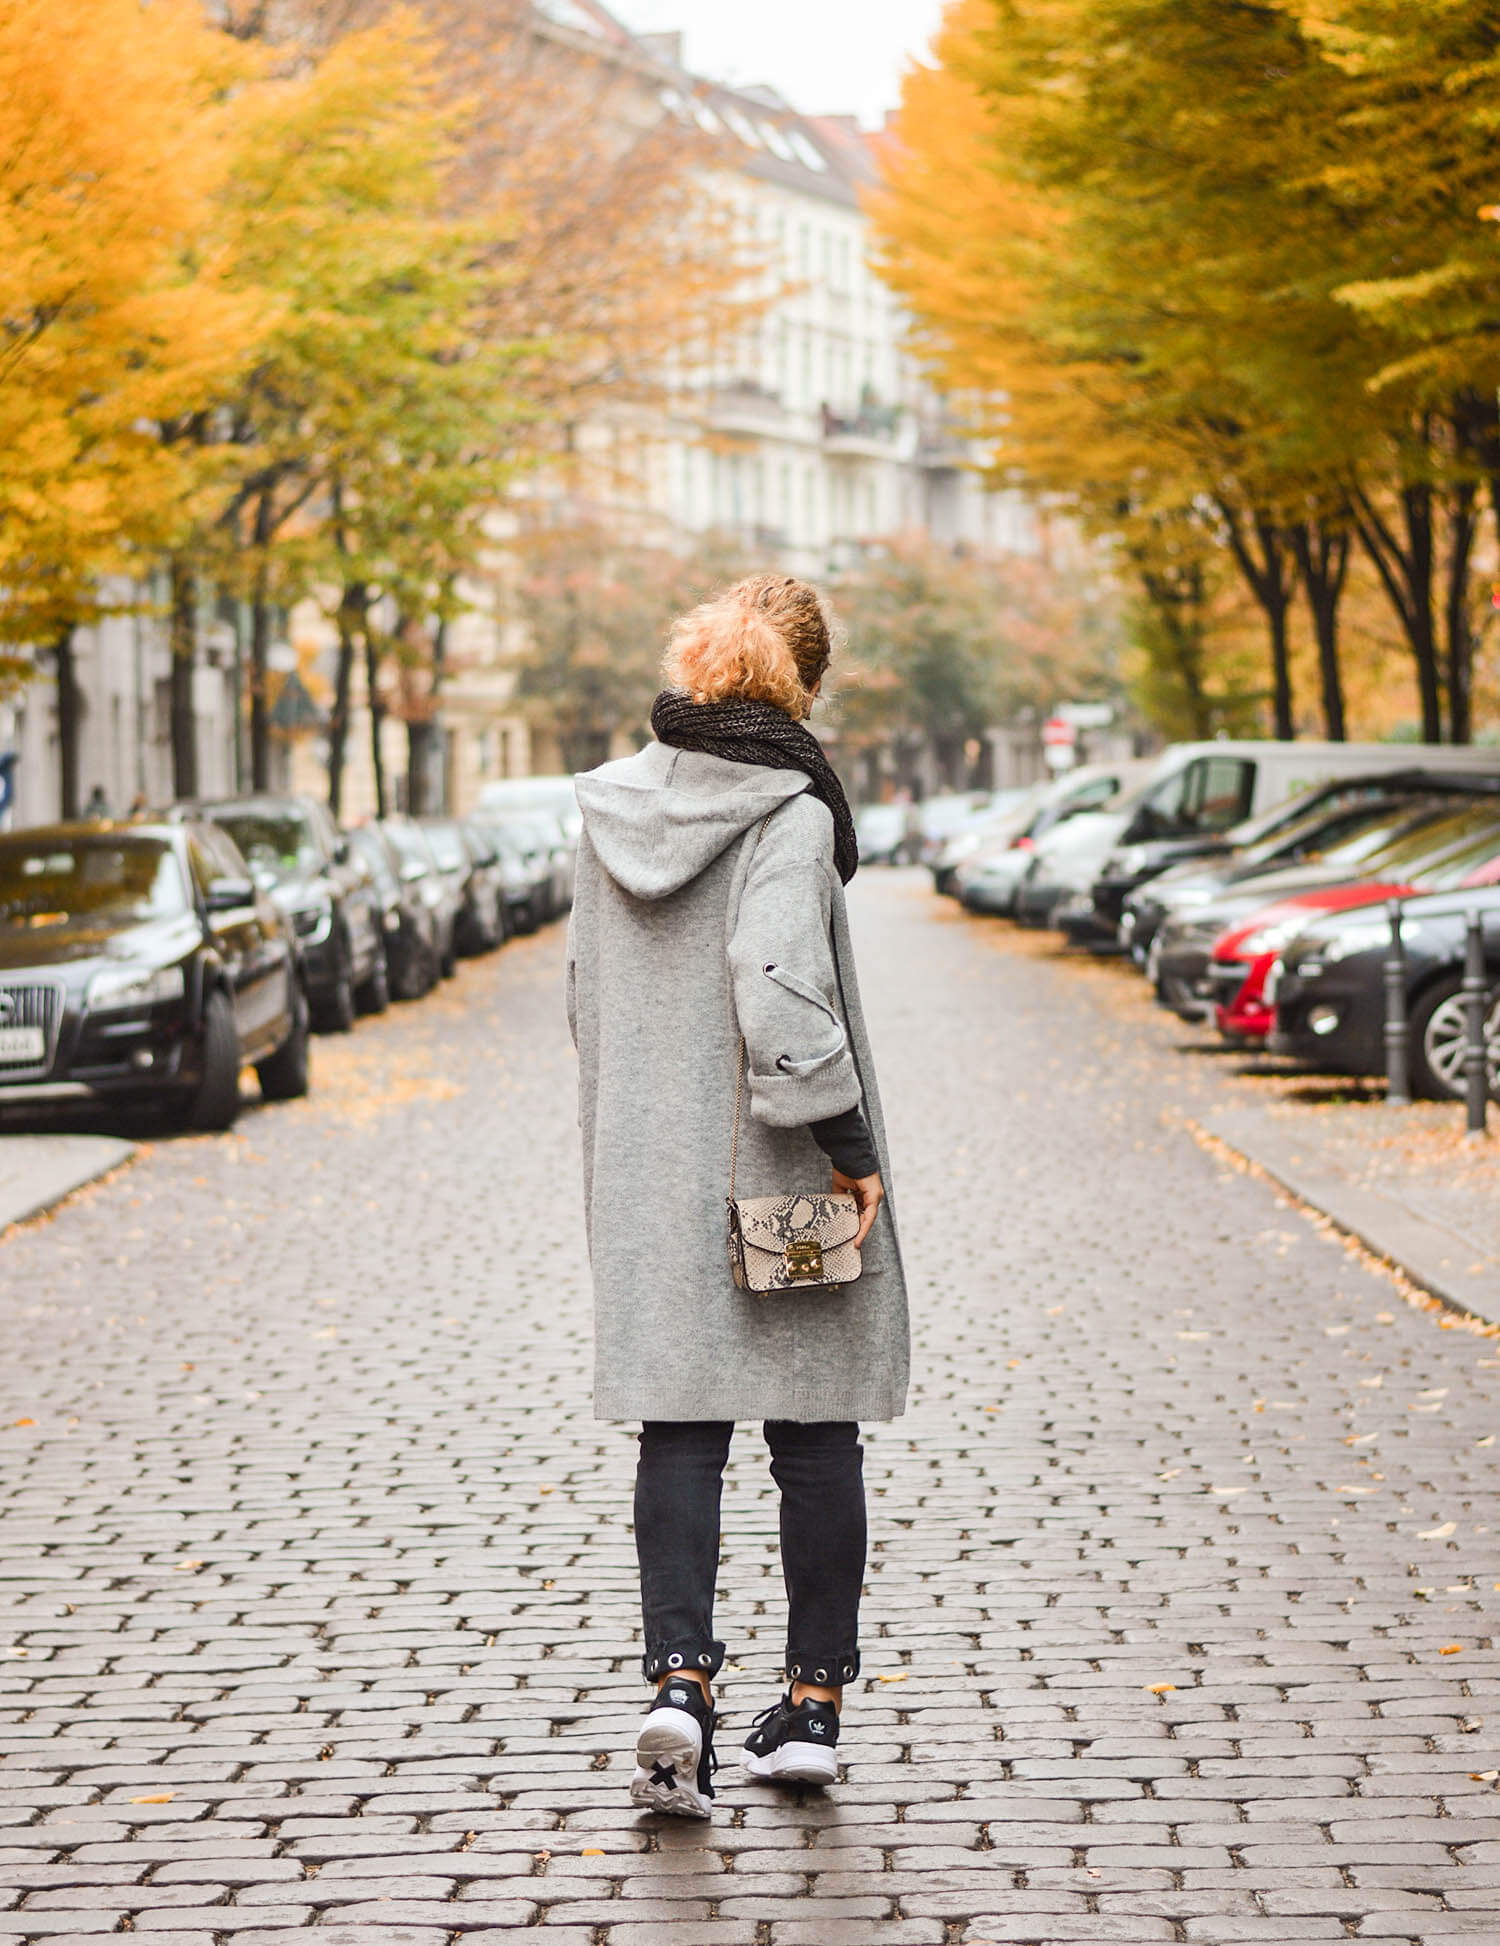 Allgrey Casual Streetstyle in Berlin Kationette Fashionblogger Germany